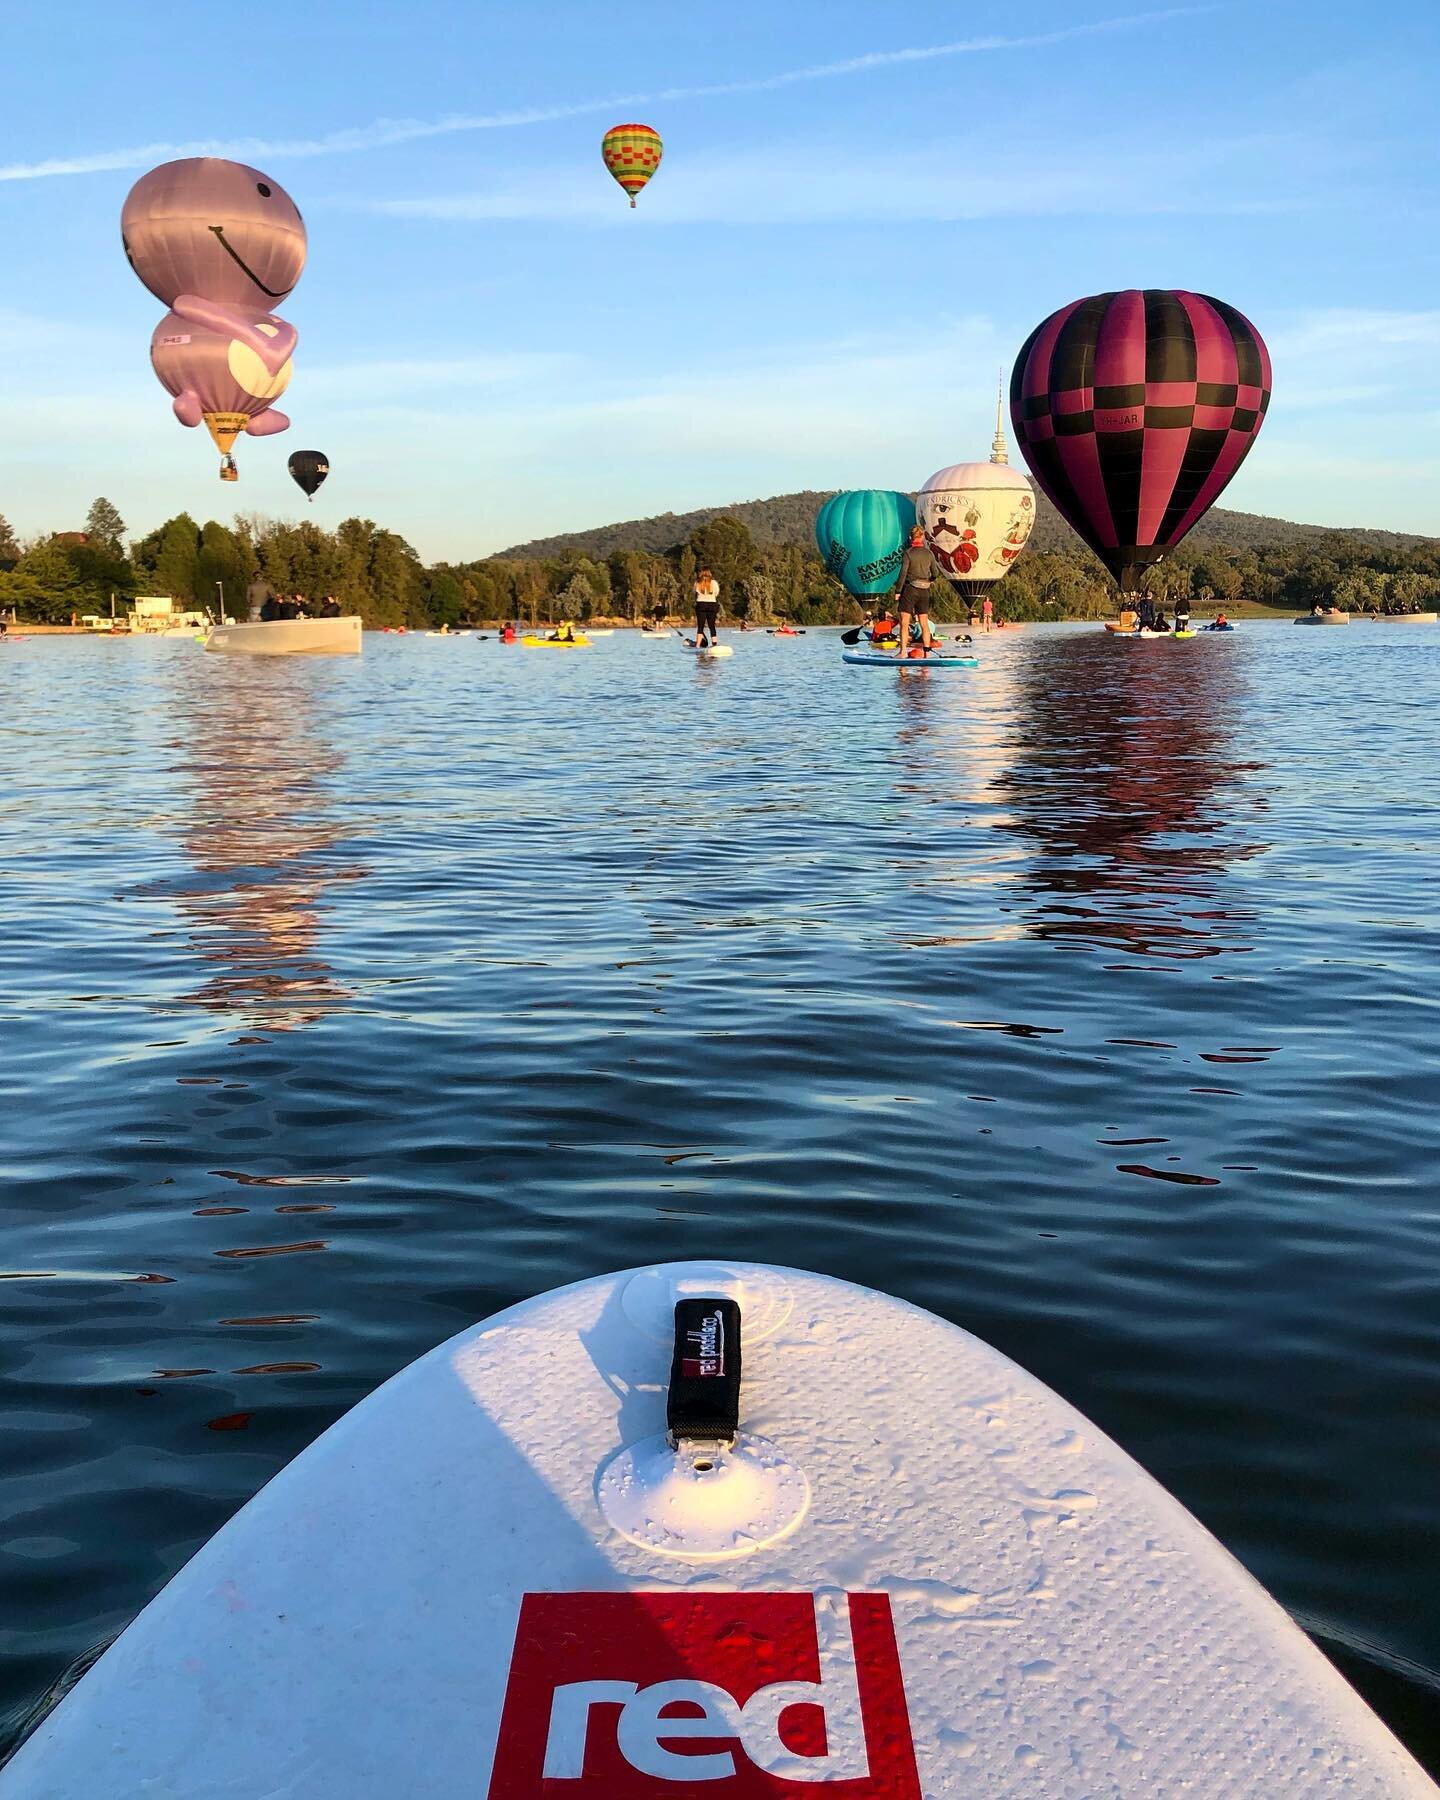 Ready for tomorrow? 💪🏼
.
Tomorrow I will be back on the water here in #Canberra and this time... I&rsquo;m taking you with me!! 🎈
.
Join me (Vikki, founder of She SUPs) via the @redpaddleco &amp; @redpaddlecoau Instagram pages as I host an #Intern